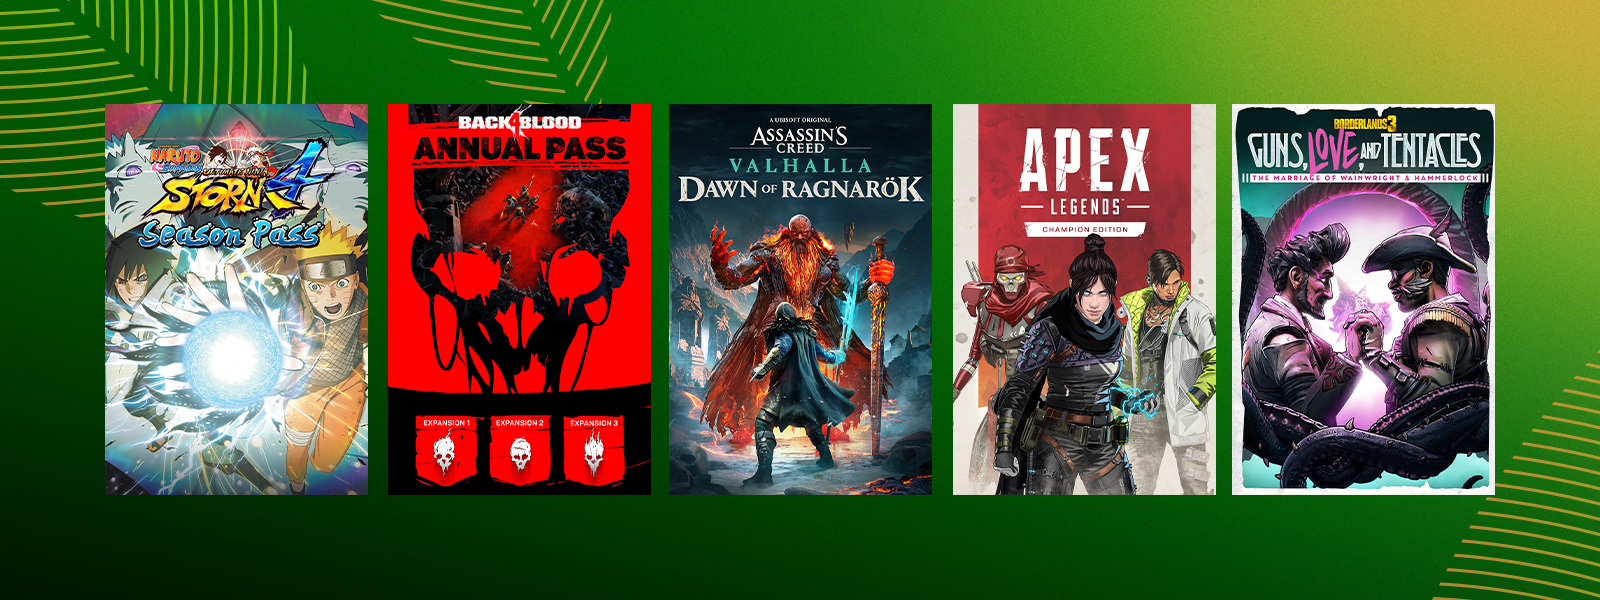 Box art from games that are part of the Spring Add-on Sale, including Back4Blood Annual Pass, Assassin’s Creed Valhalla Dawn of Ragnarok, and Apex Legends – Champion Edition.